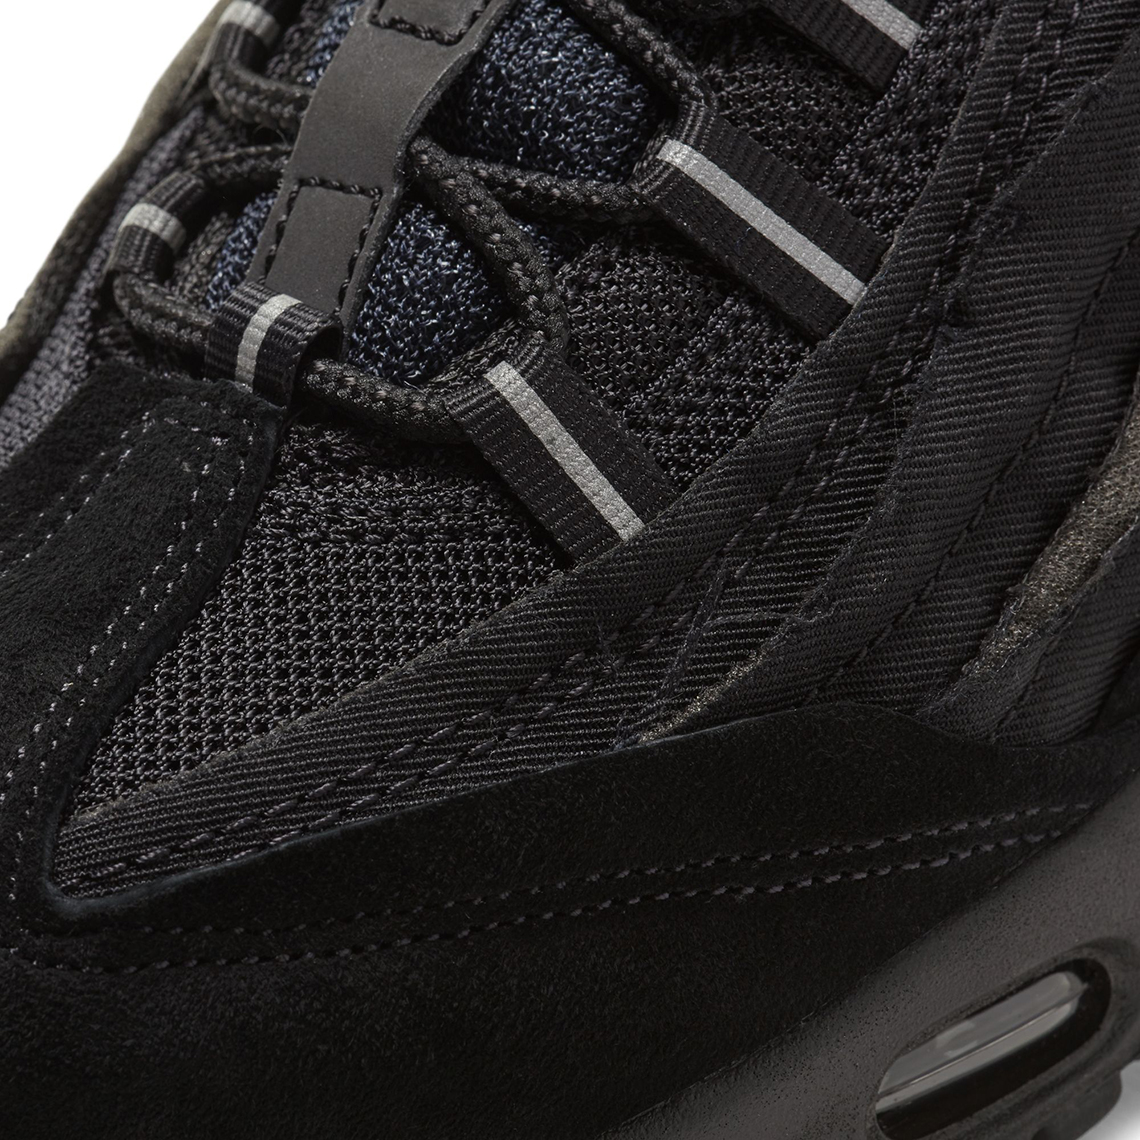 COMME des GARCONS CDG Nike Air Max 95 Release Info | SneakerNews.com